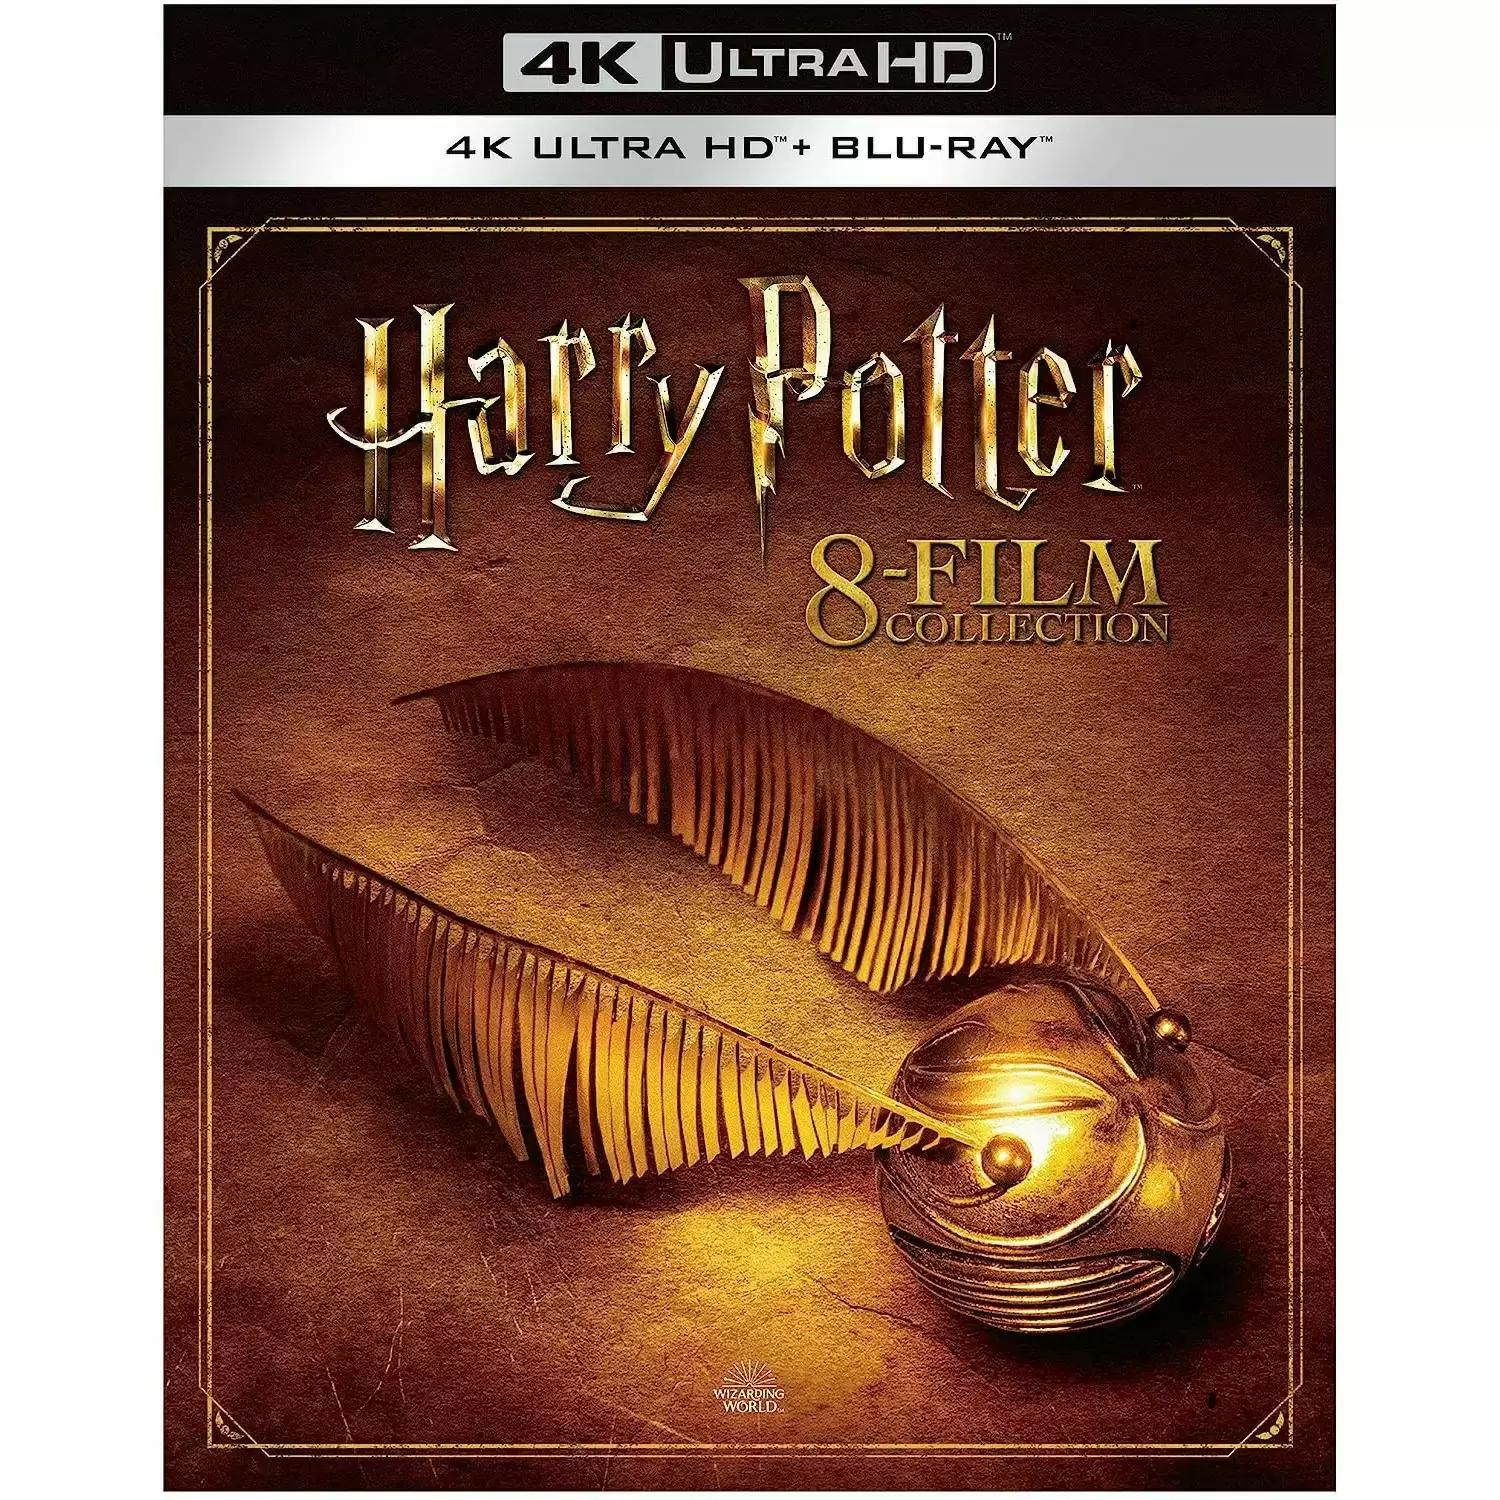 Harry Potter 8-Film Collection 4K UHD + Blu-ray for $59.99 Shipped